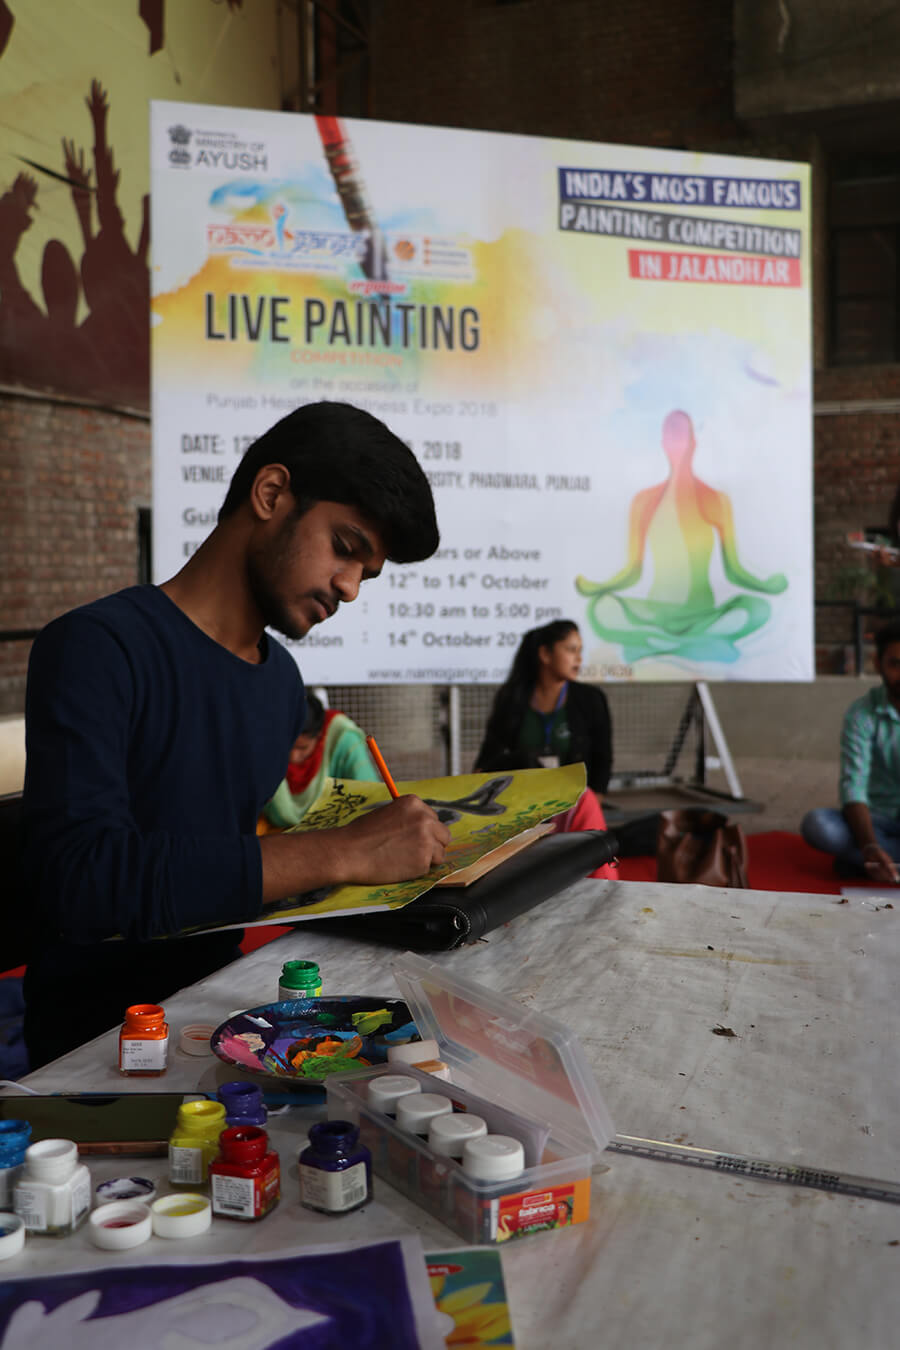 Live Painting Competition